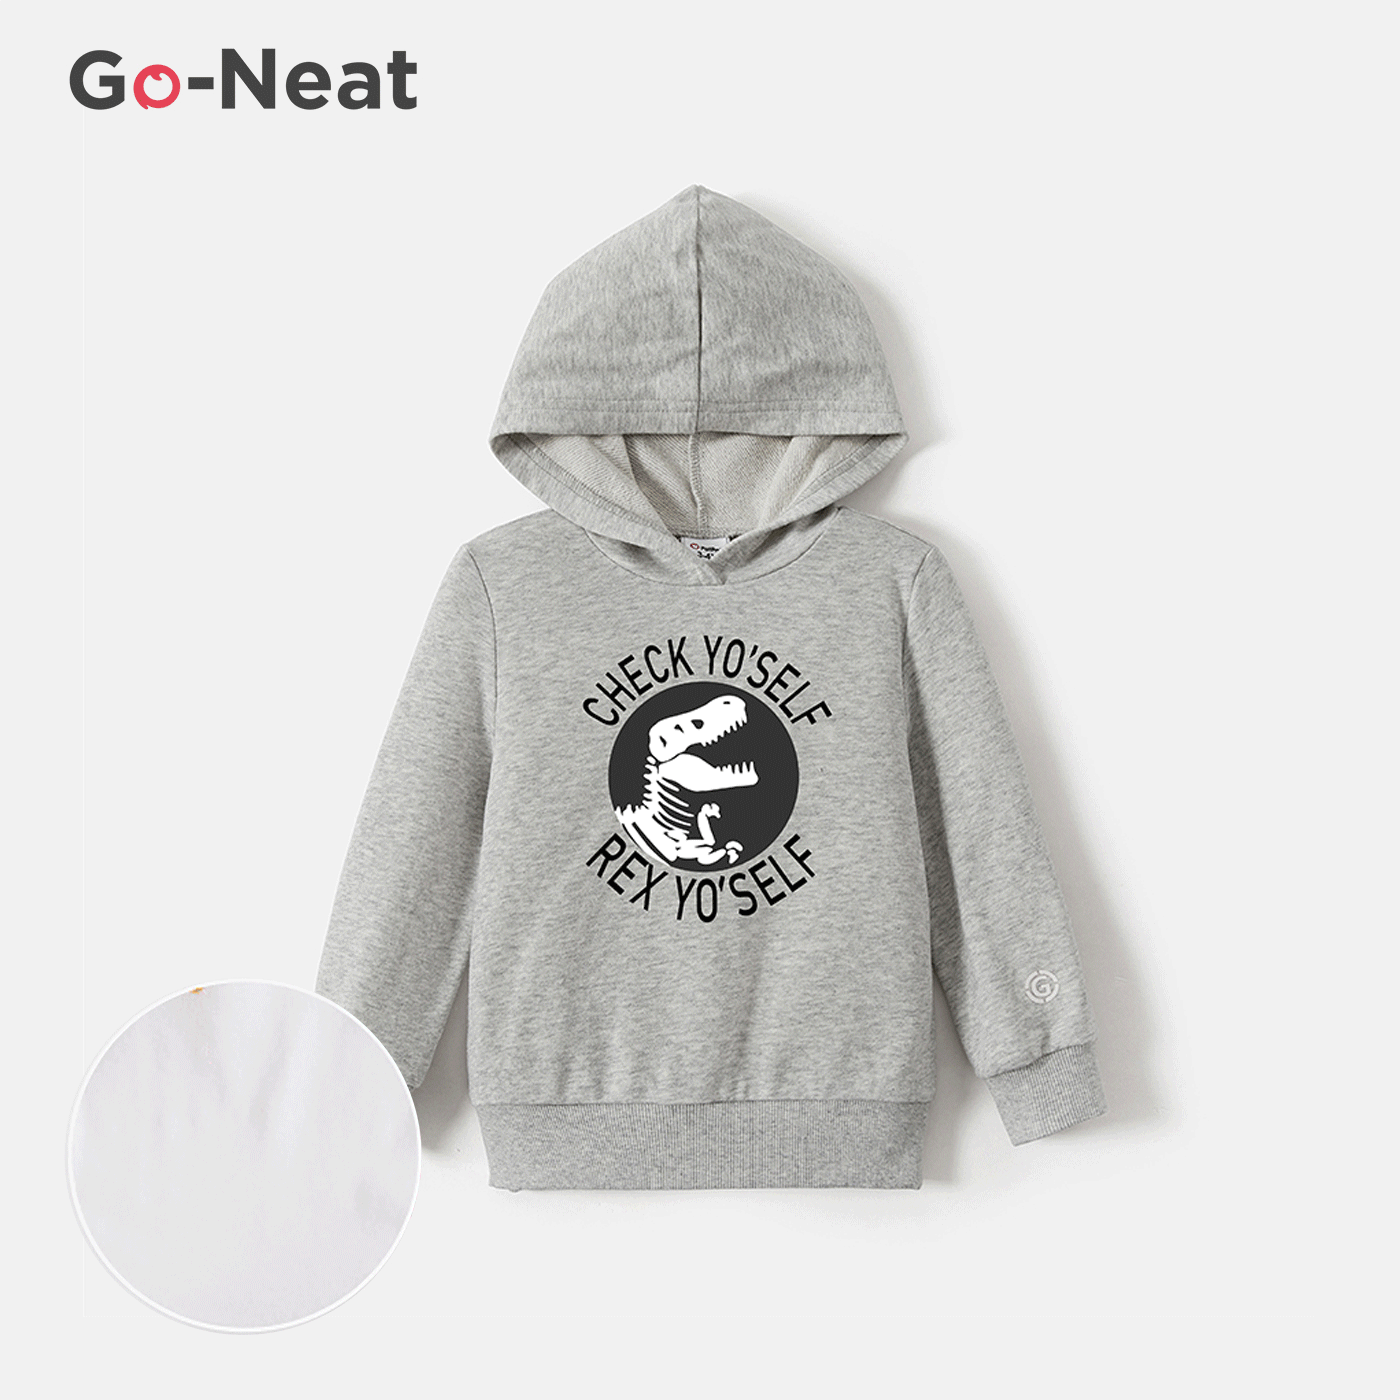 Go-Neat Water Repellent and Stain Resistant Sibling Matching Dinosaur & Letter Print Grey Long-sleeve Hoodies Light Grey image 1